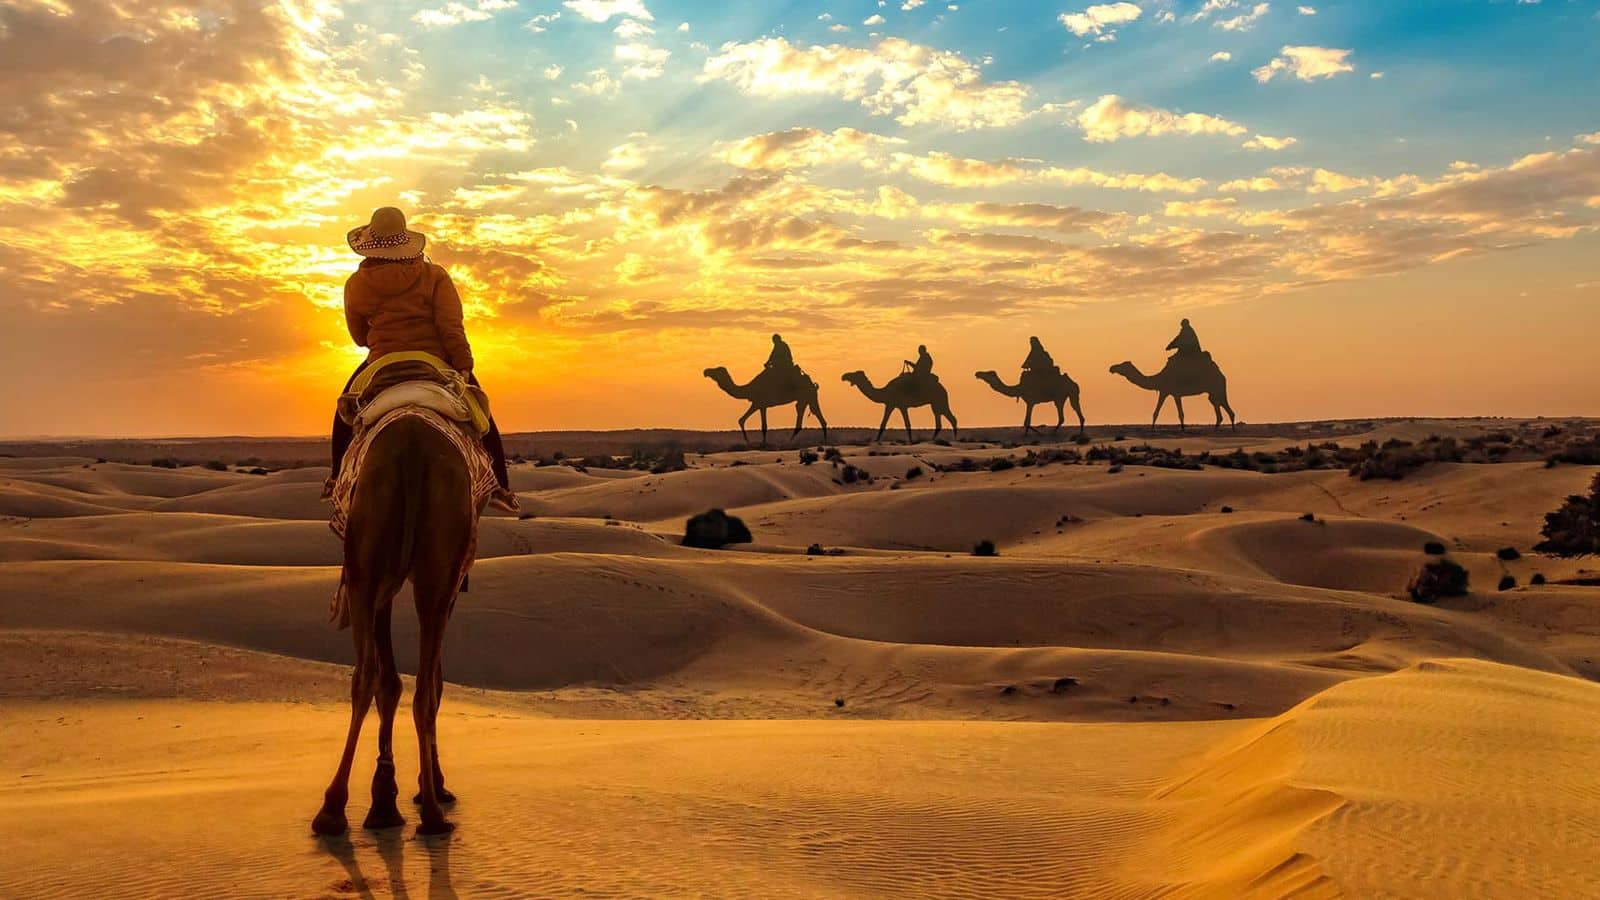 Explore Jaisalmer's desert culture with these excellent recommendations